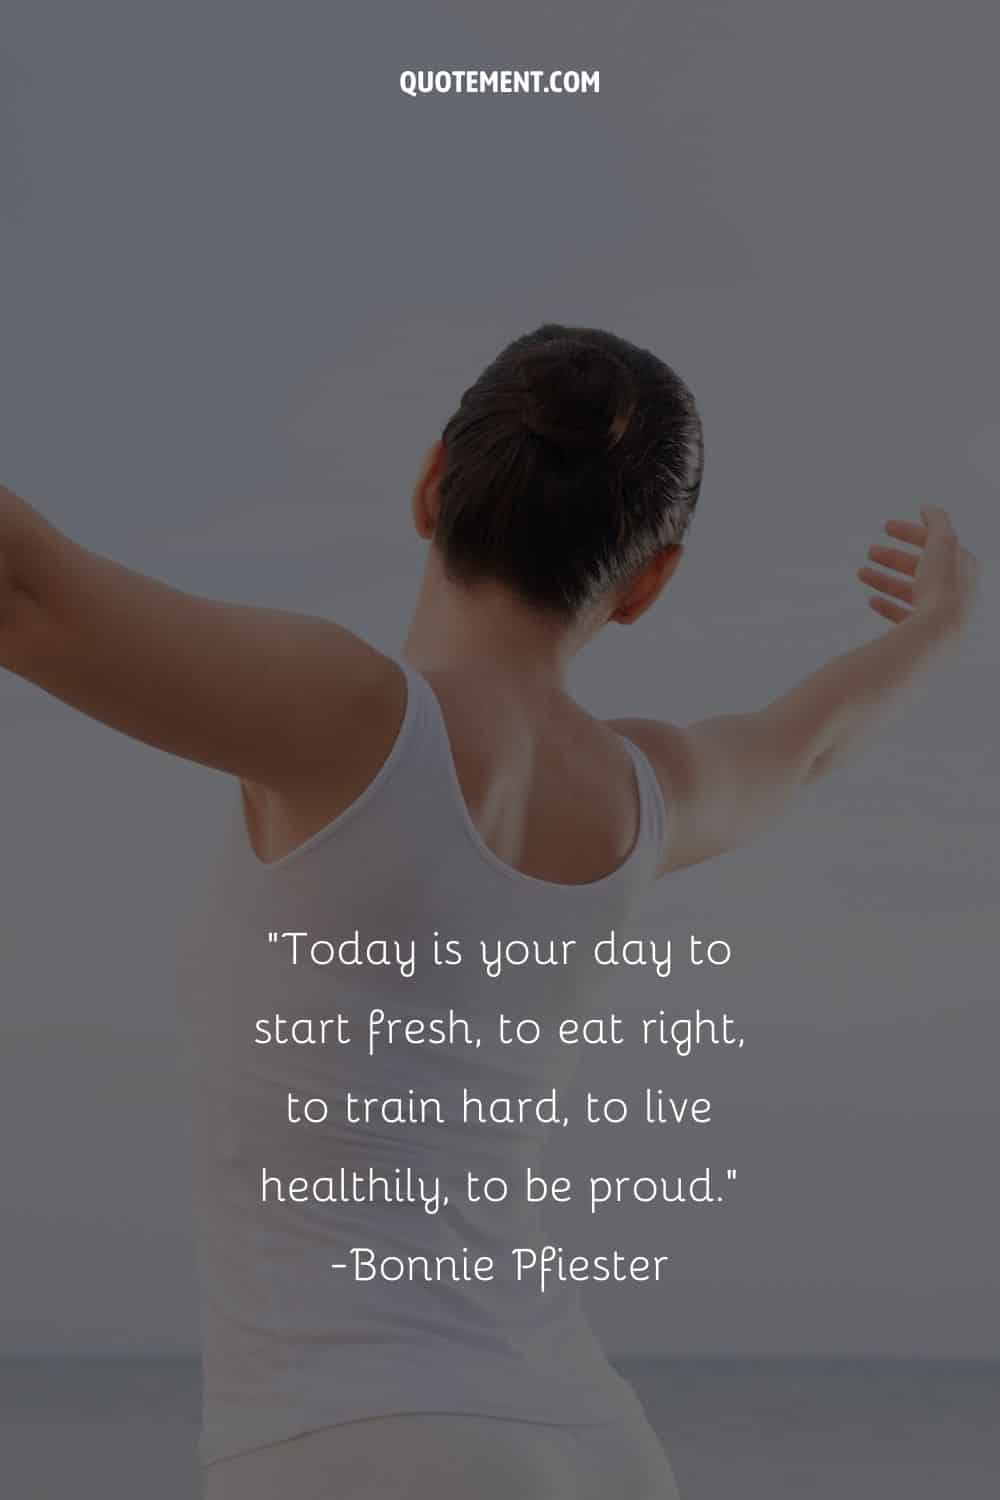 Today is your day to start fresh, to eat right, to train hard, to live healthily, to be proud